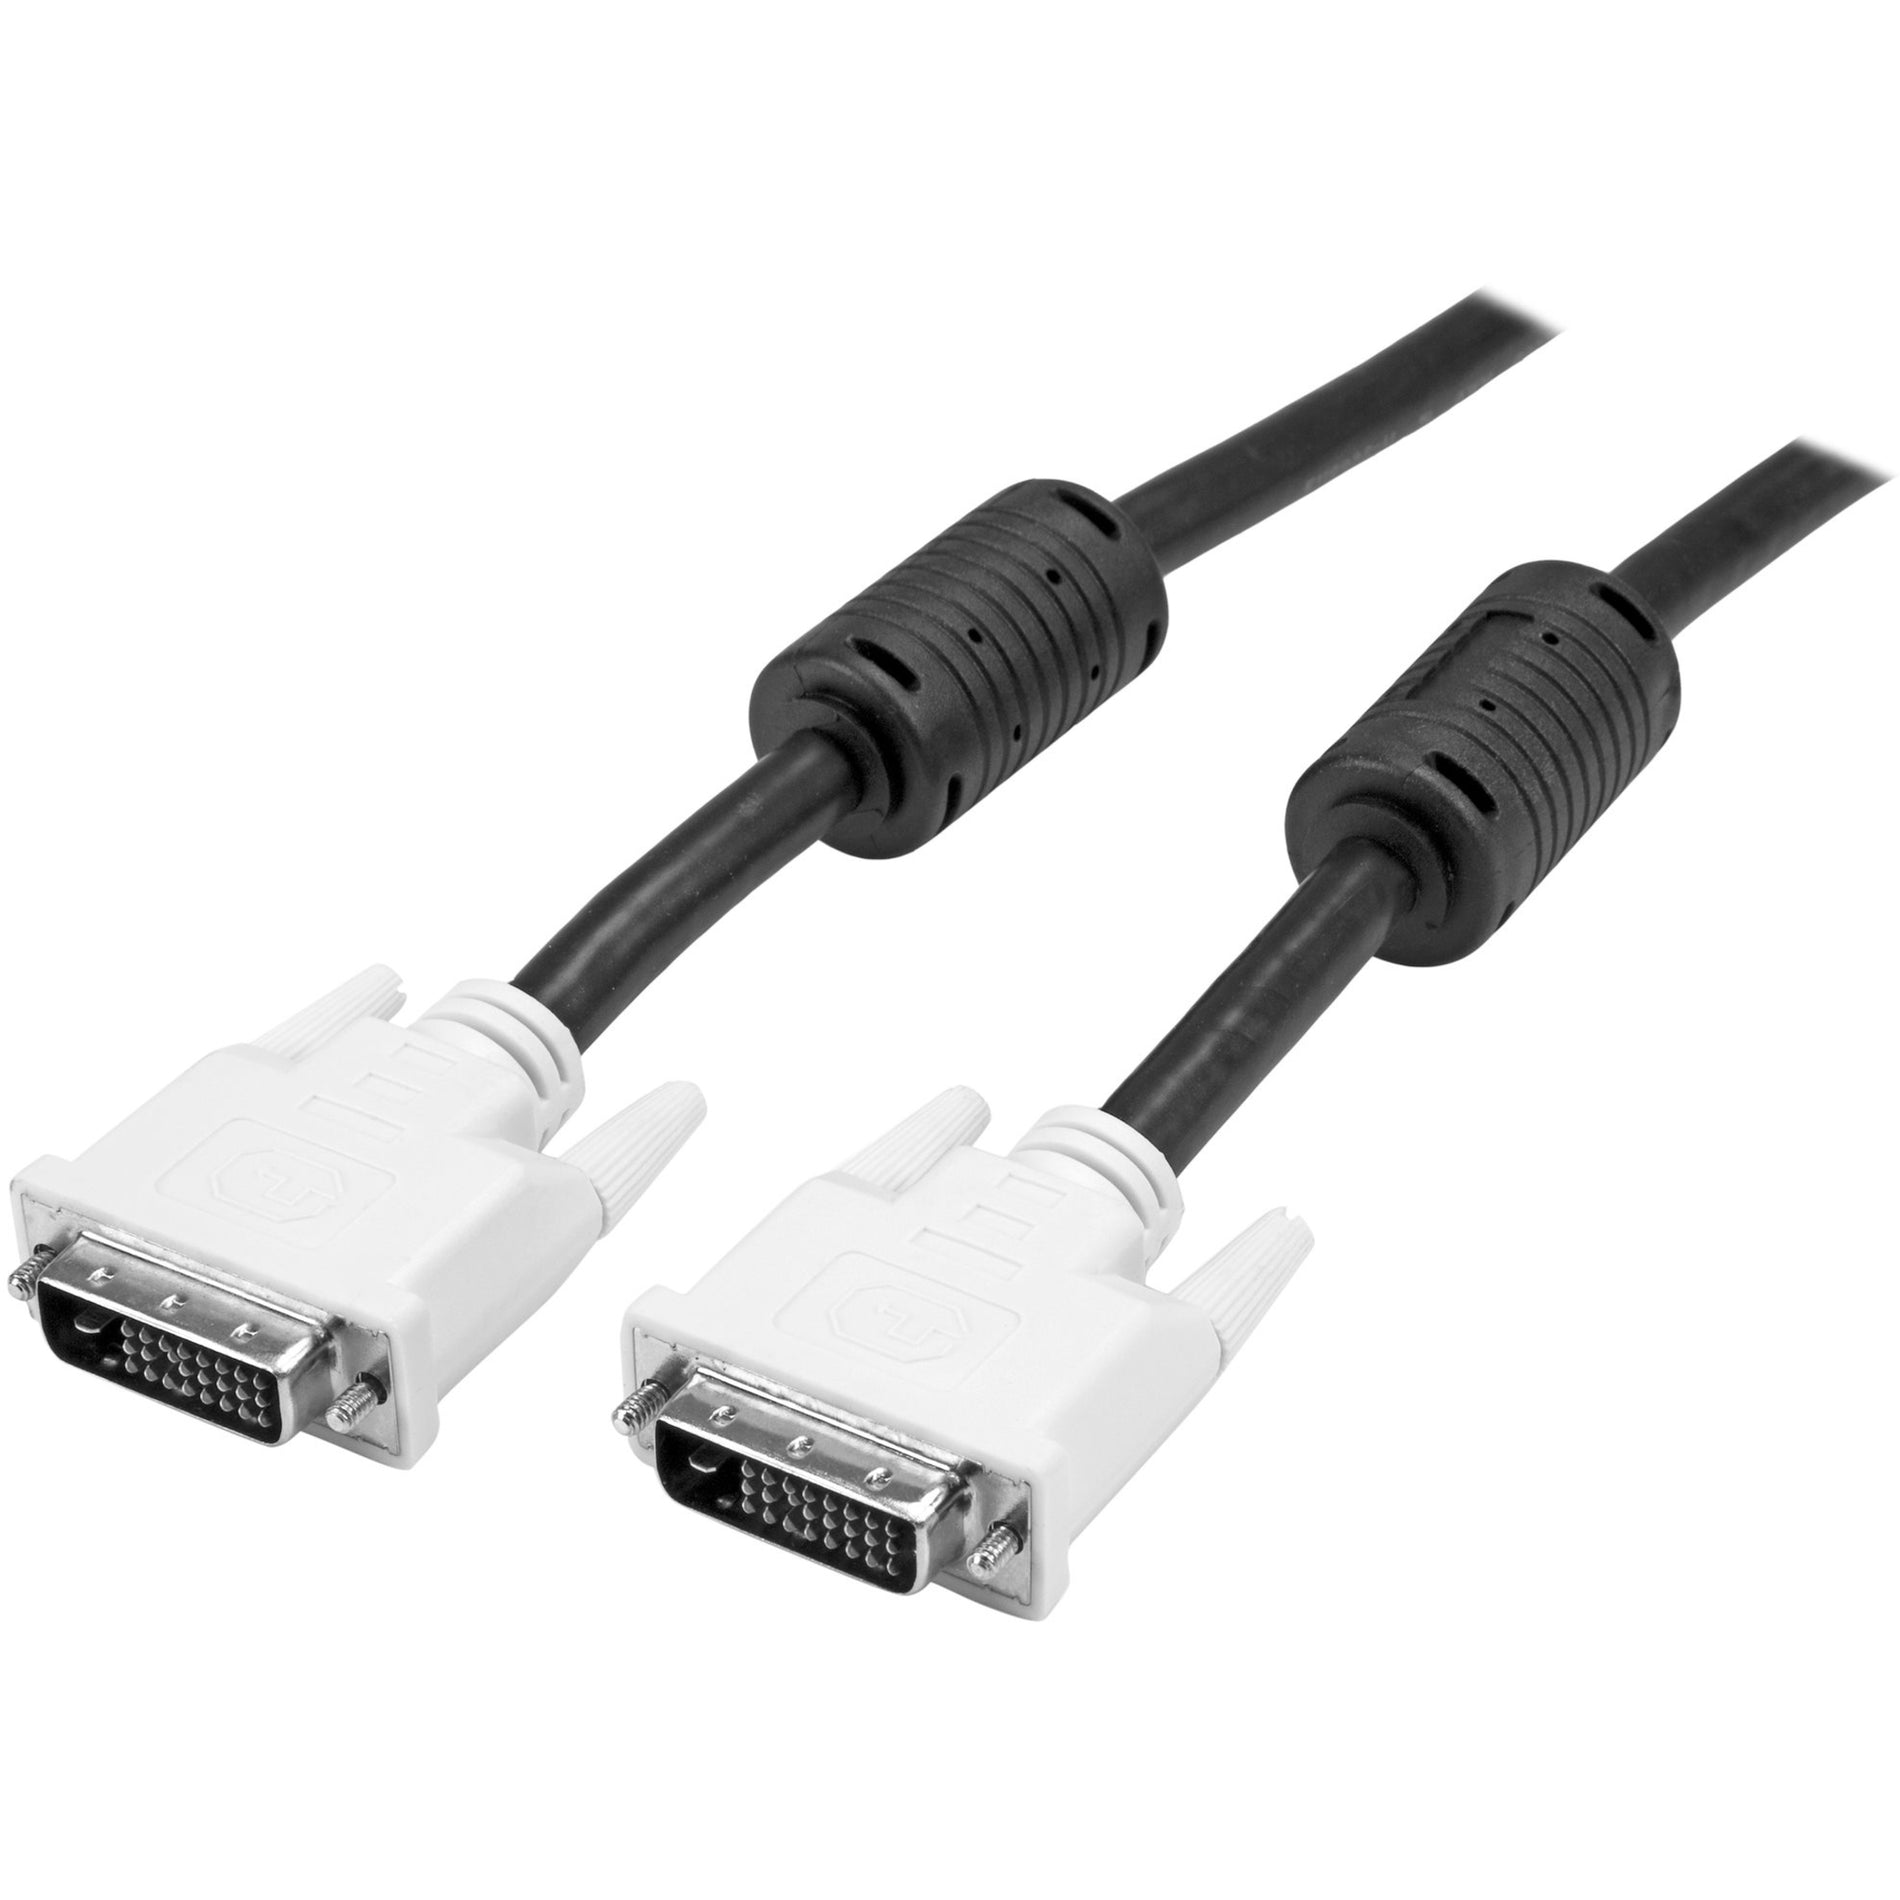 StarTech.com DVIDDMM50 50 ft DVI-D Dual Link Cable - M/M, High-Speed Video Cable for Projector, Monitor, Desktop Computer, Notebook